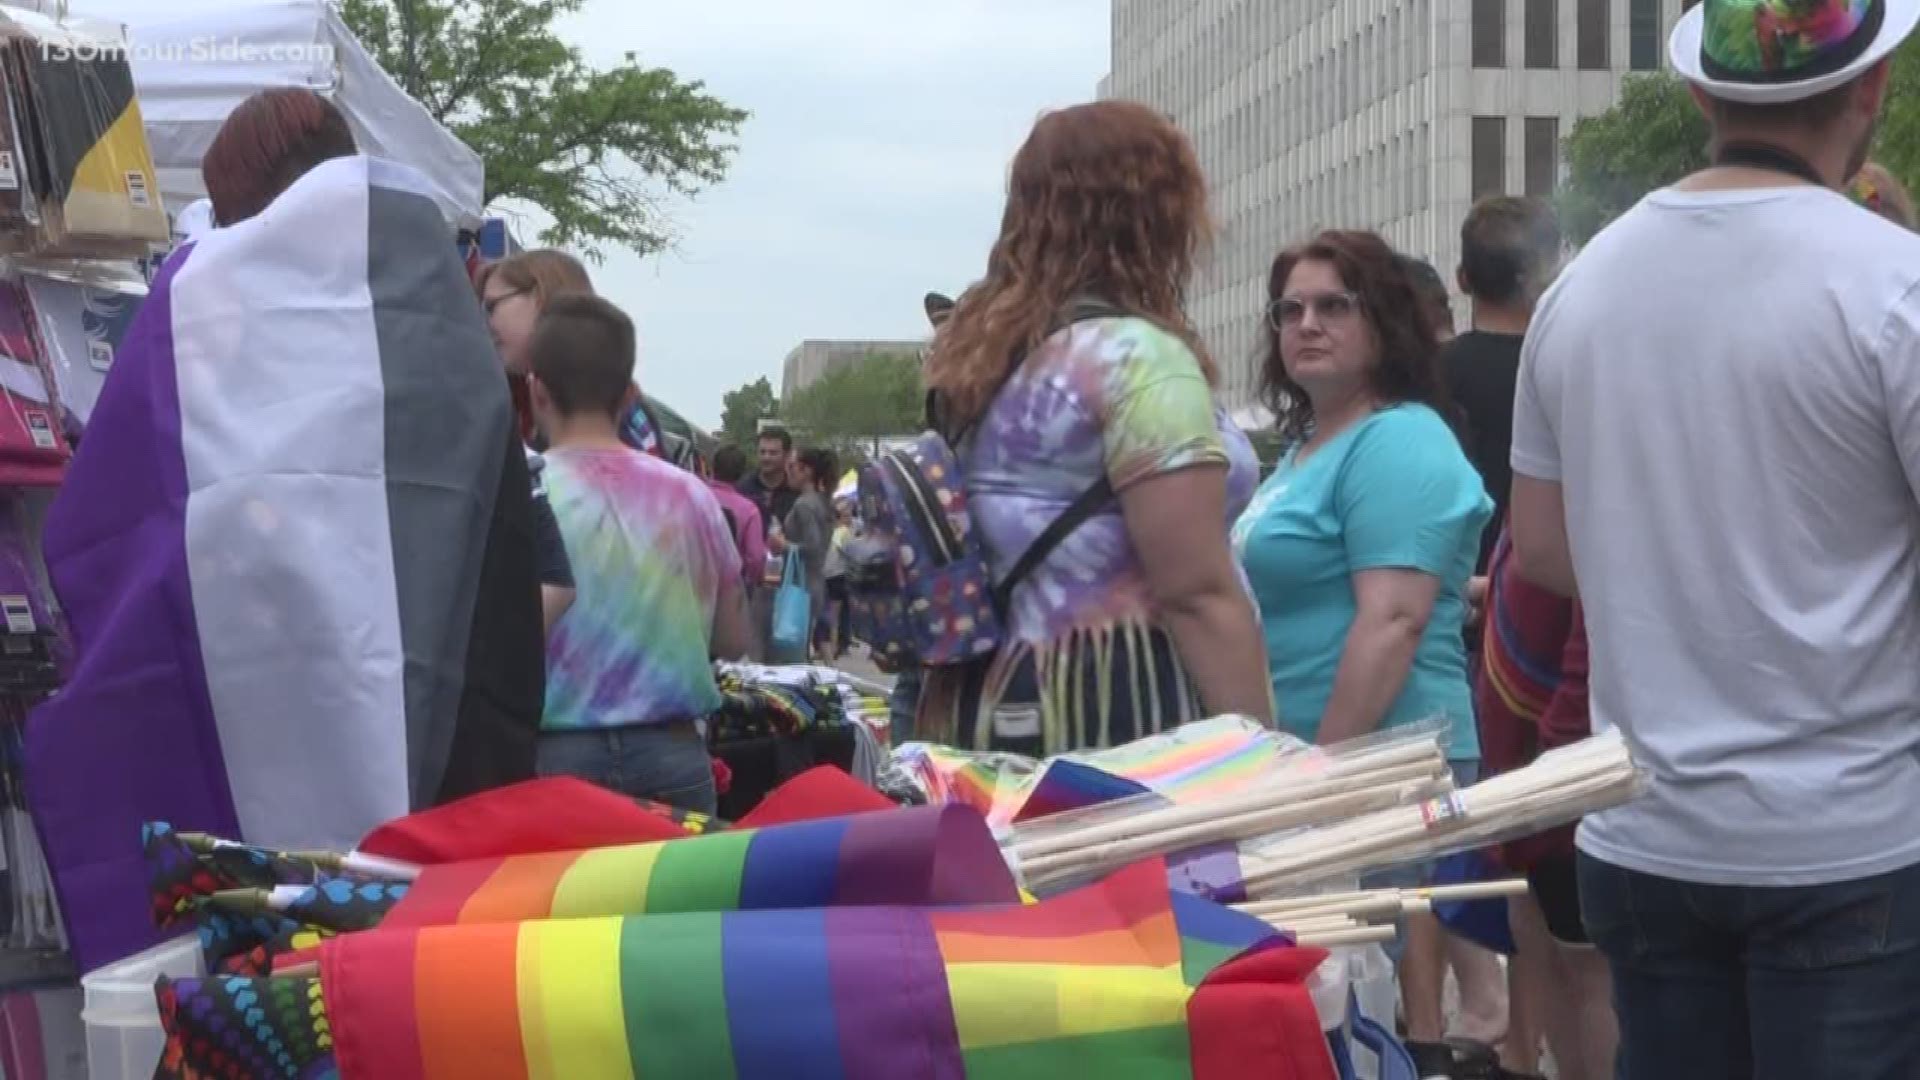 Grand Rapids Pride Festival held for 31st year